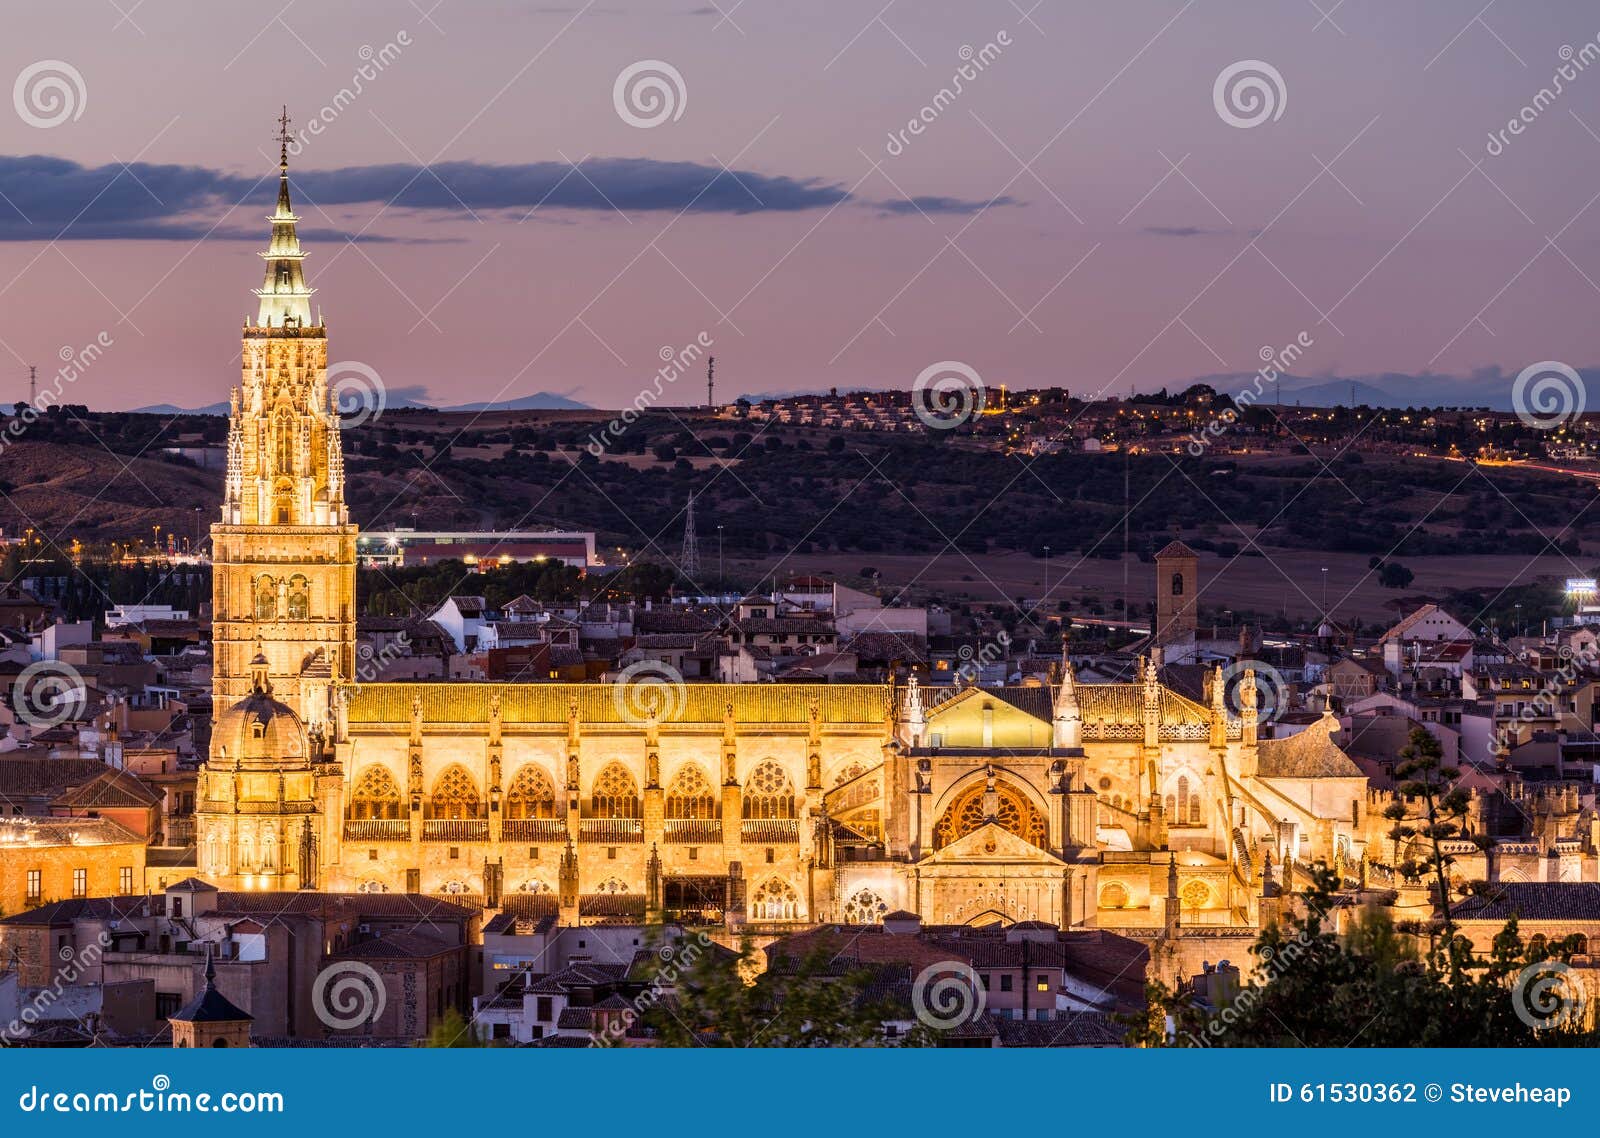 evening view of toledo cathedral in spain